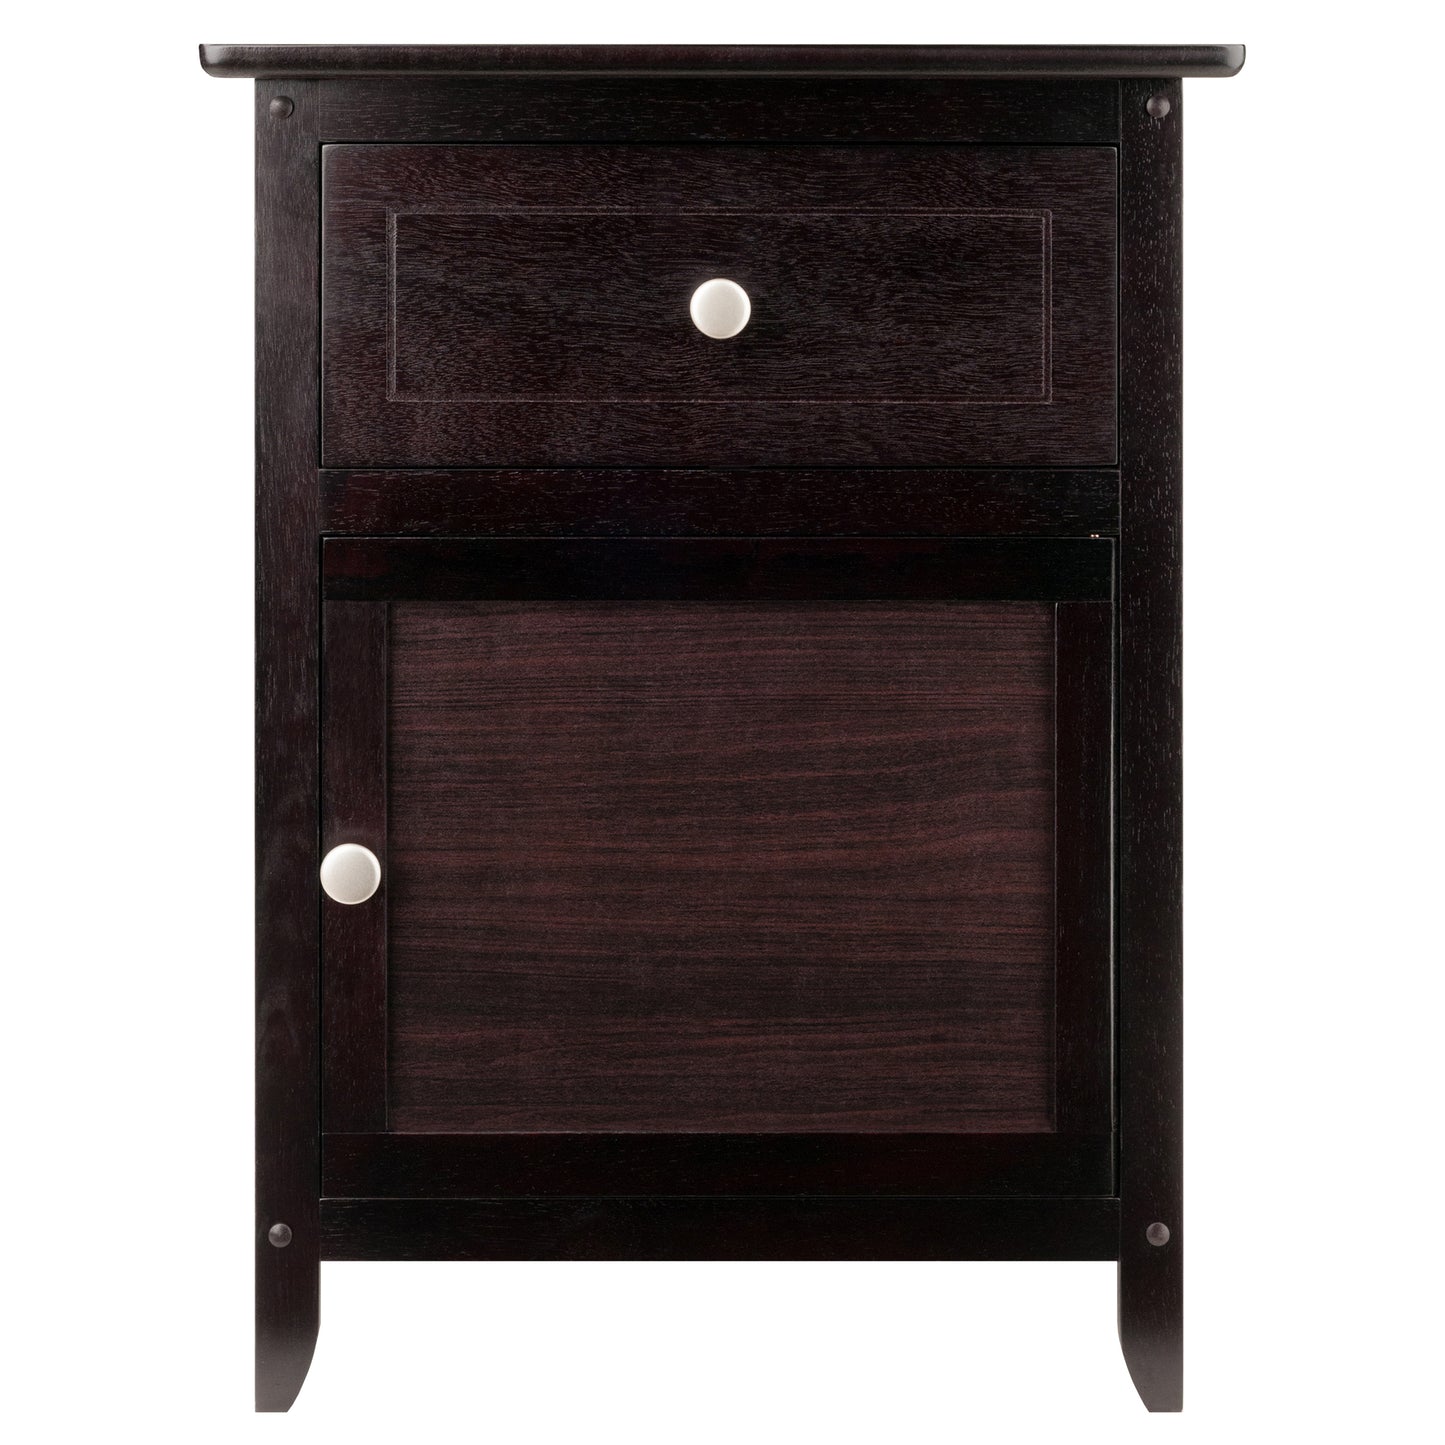 Eugene Accent Table, Nightstand, Espresso